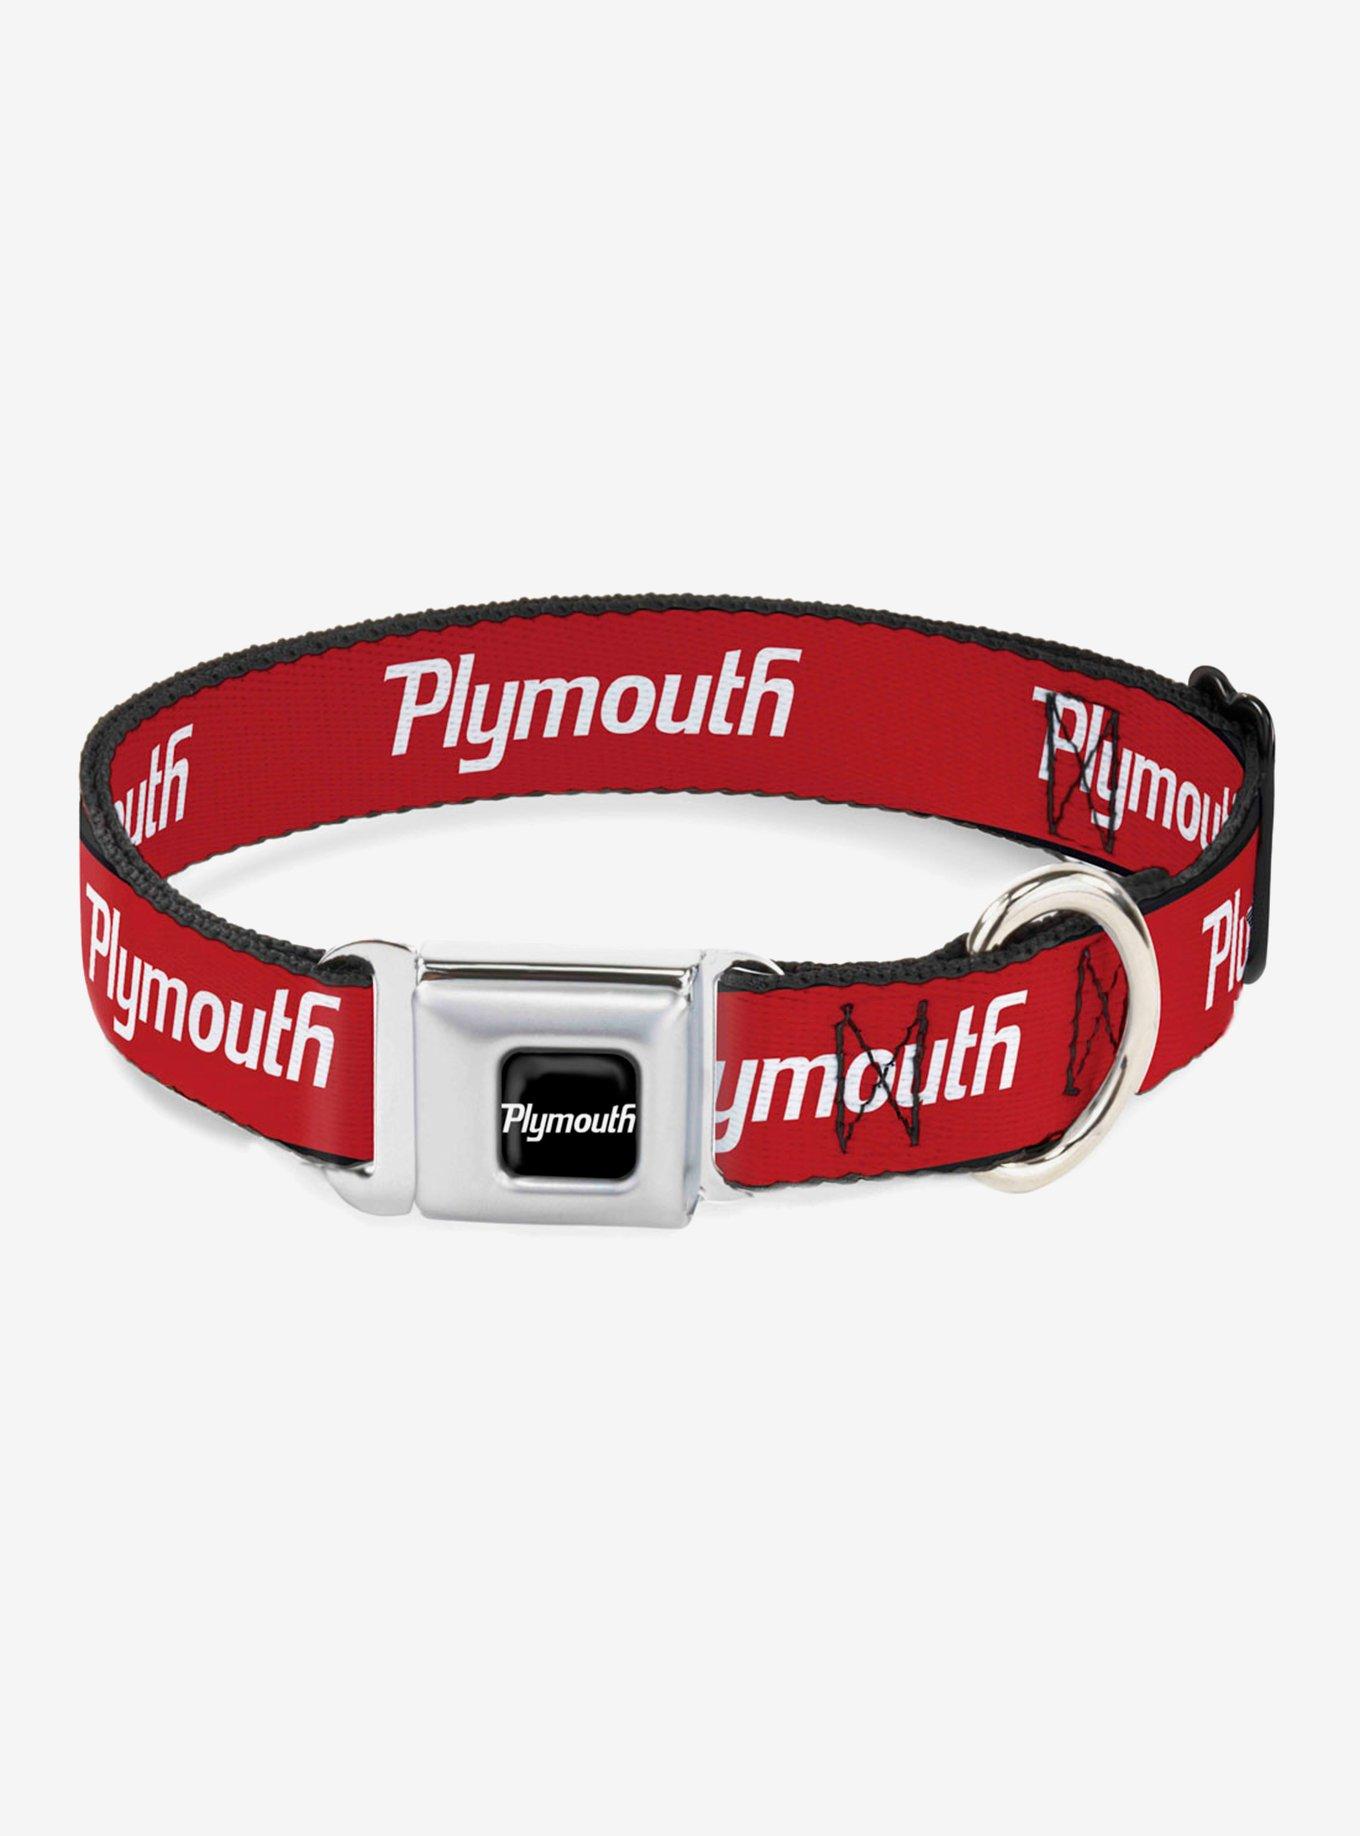 Plymouth Text Logo Seatbelt Buckle Dog Collar, RED, hi-res